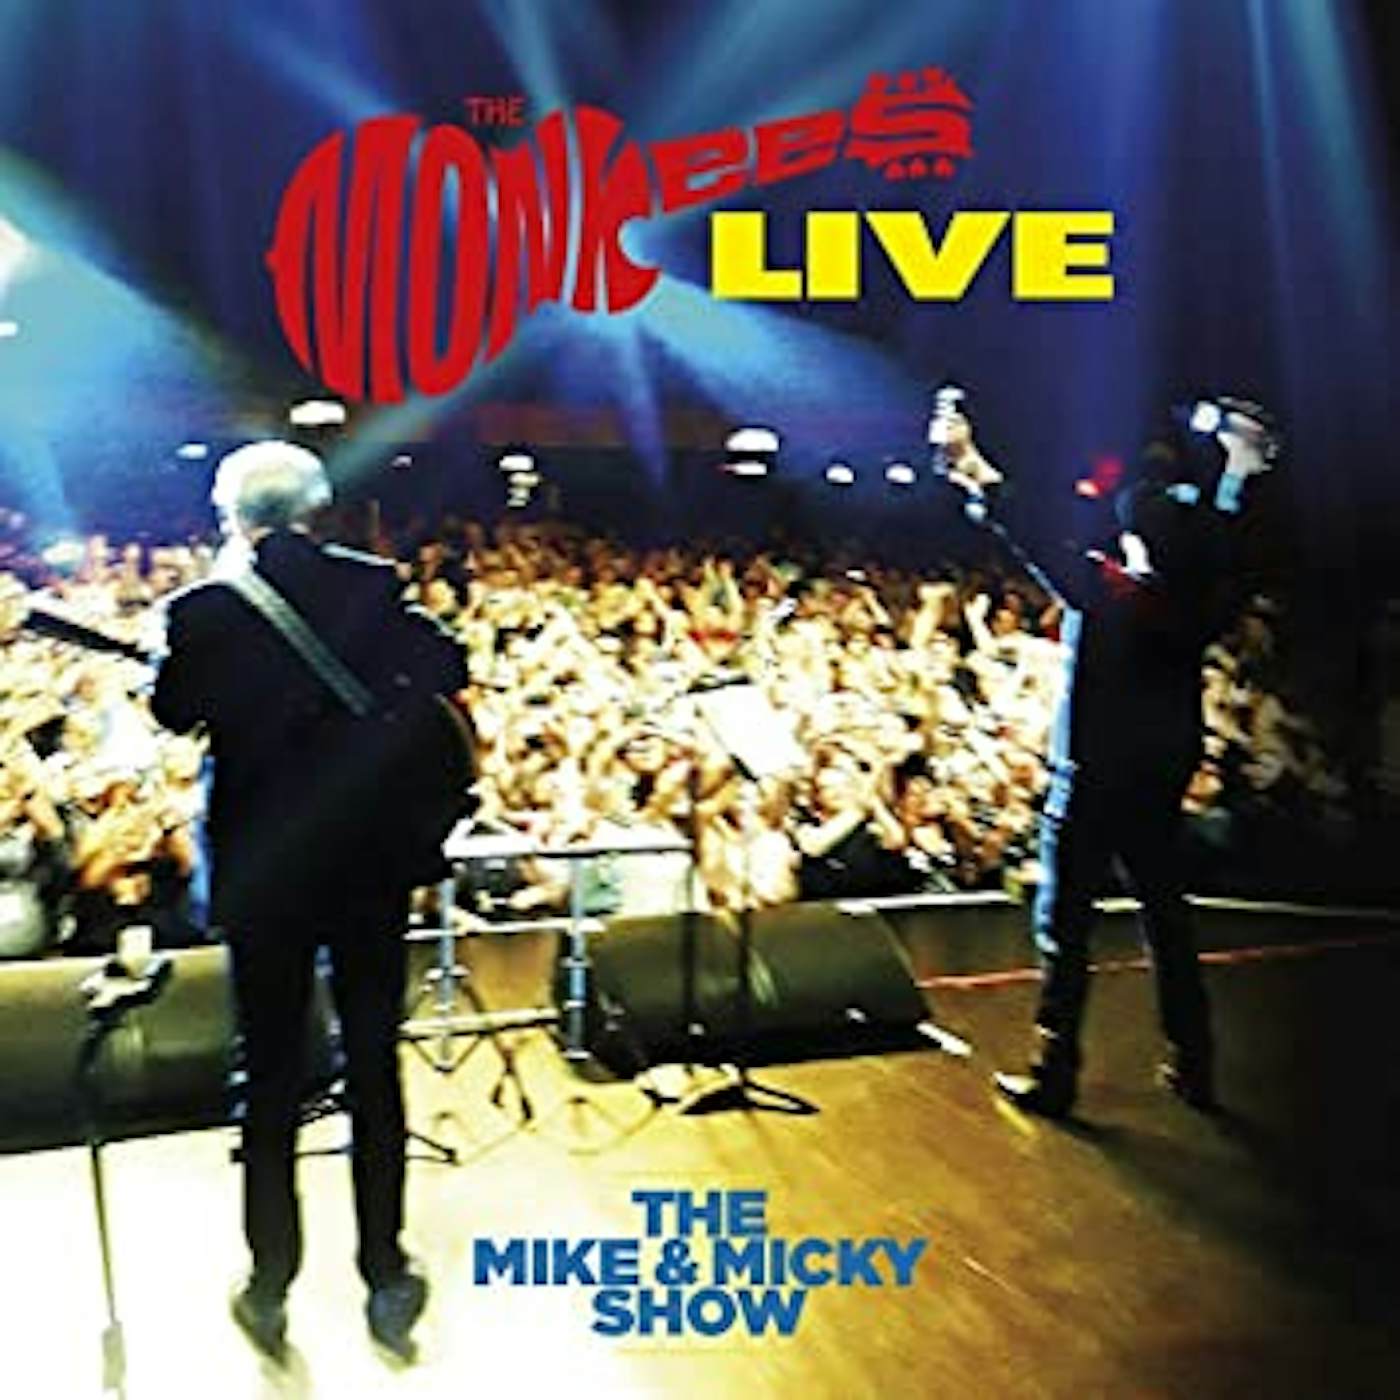 The Monkees MIKE AND MICKY SHOW LIVE CD